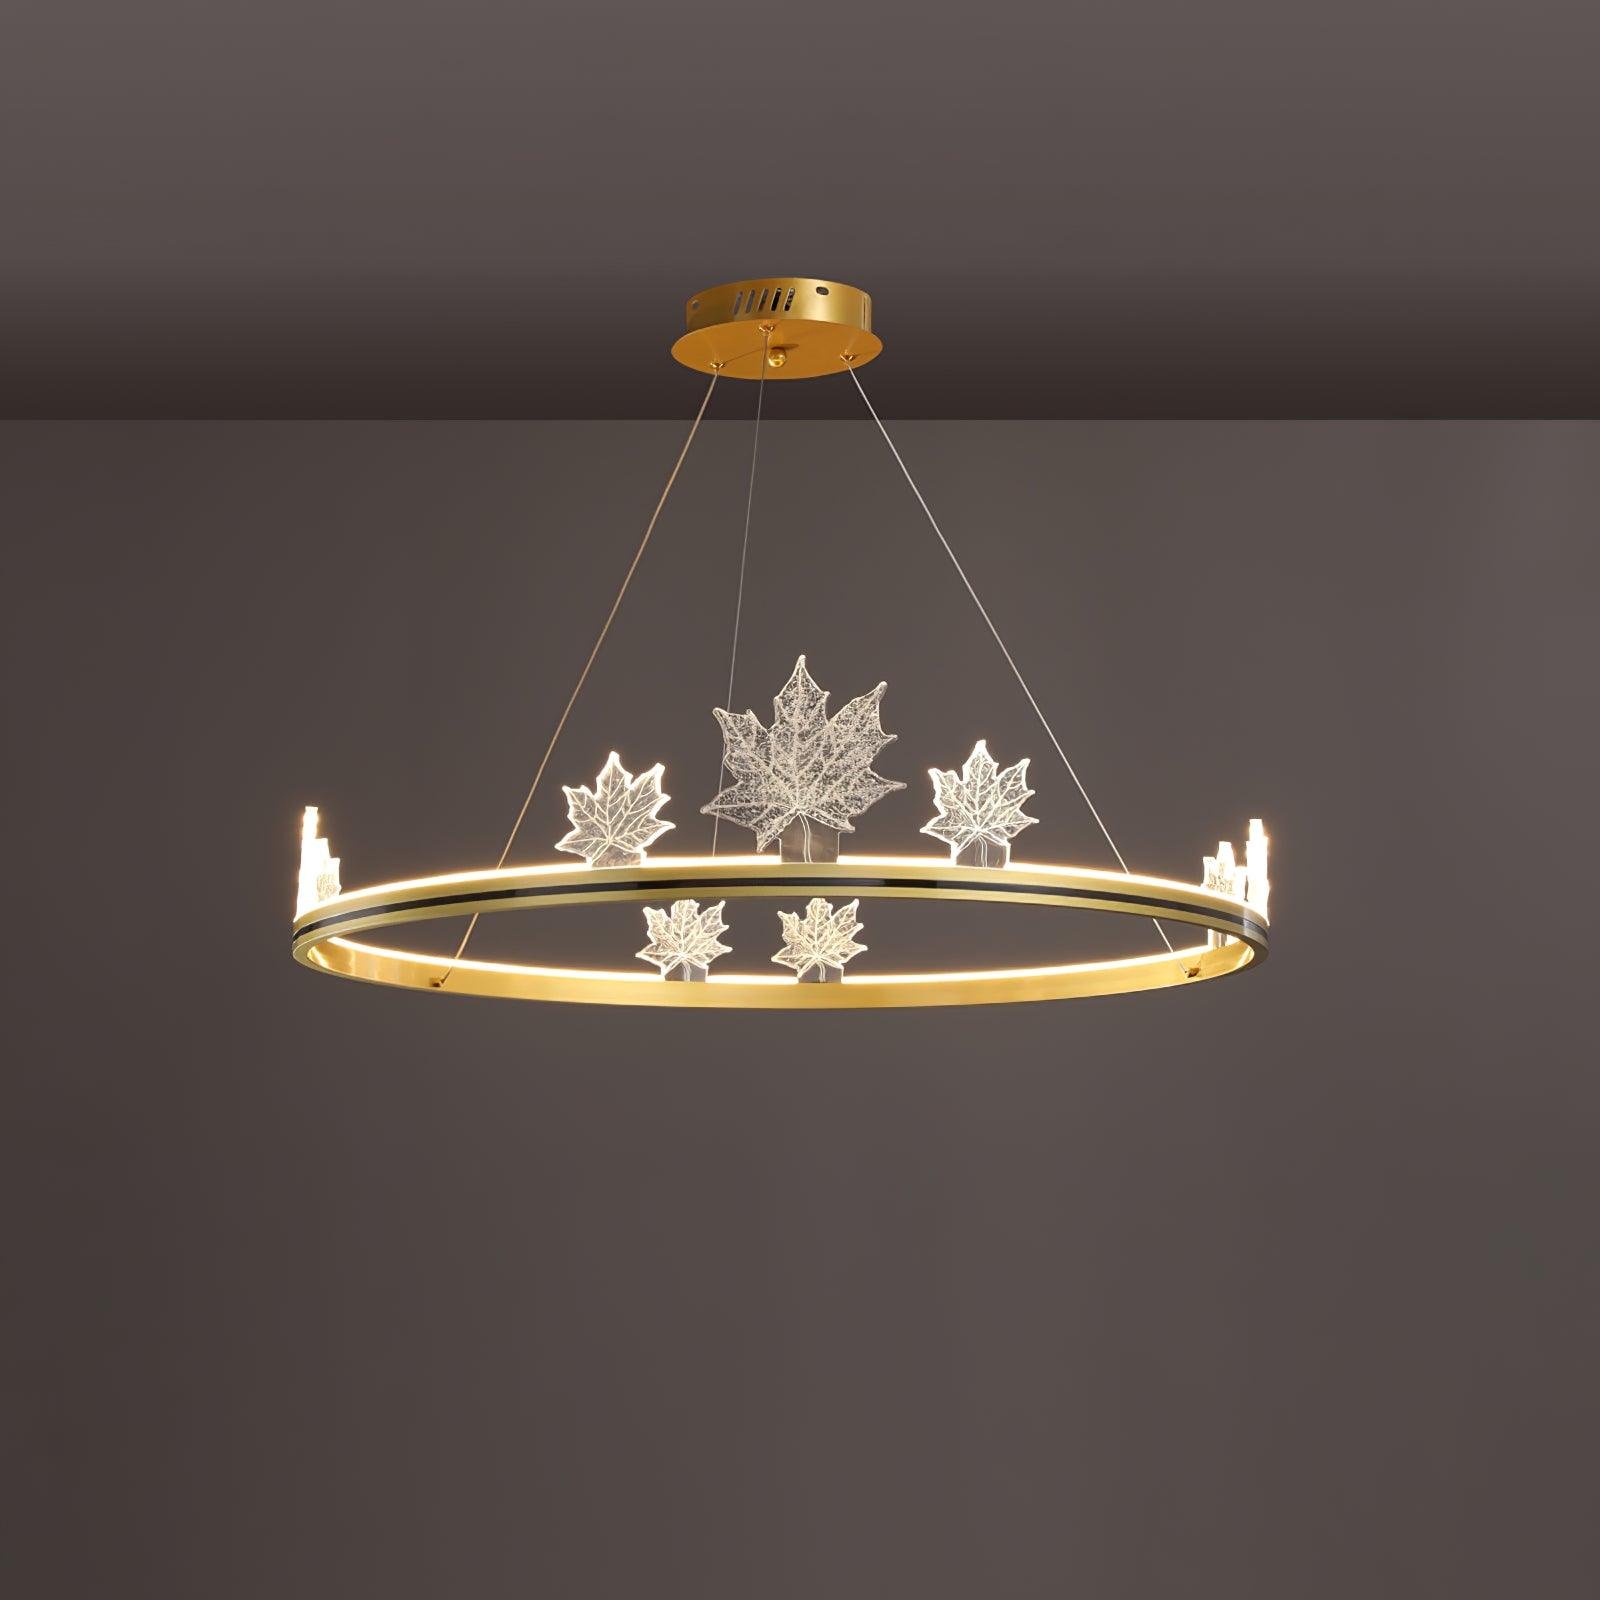 A rephrased version of the product title could be: "Gold Ion Leaf Chandelier with Dimensions ∅ 31.4″ x H 7″ (Dia 80cm x H 18cm), Emitting Cool White Light."